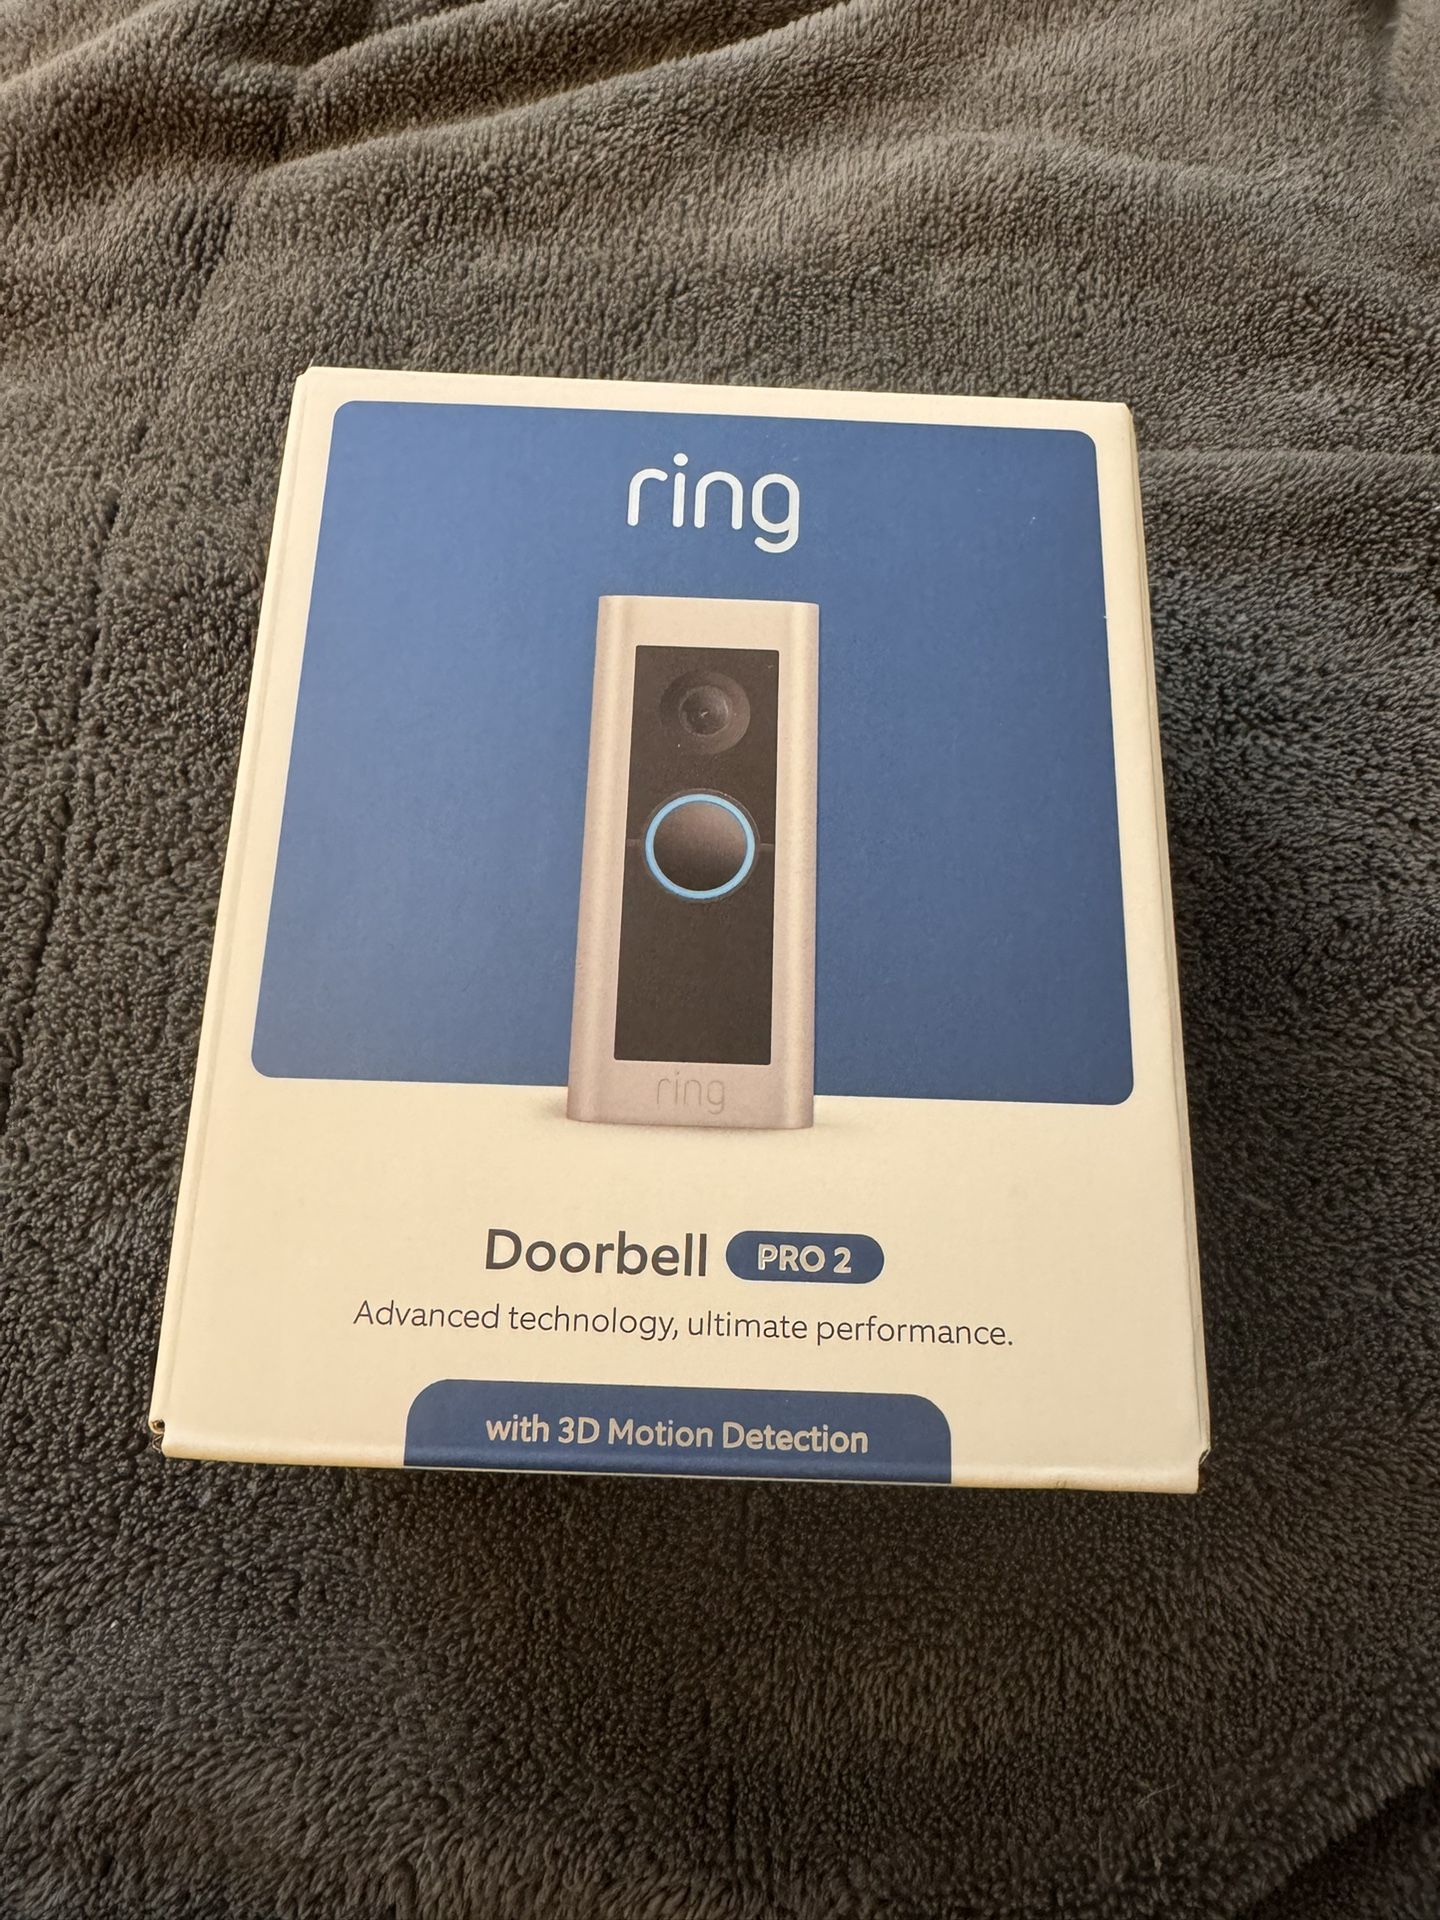 Ring Wired Doorbell Pro (Video Doorbell Pro 2) – Best-in-class with cutting-edge features (existing doorbell wiring required)